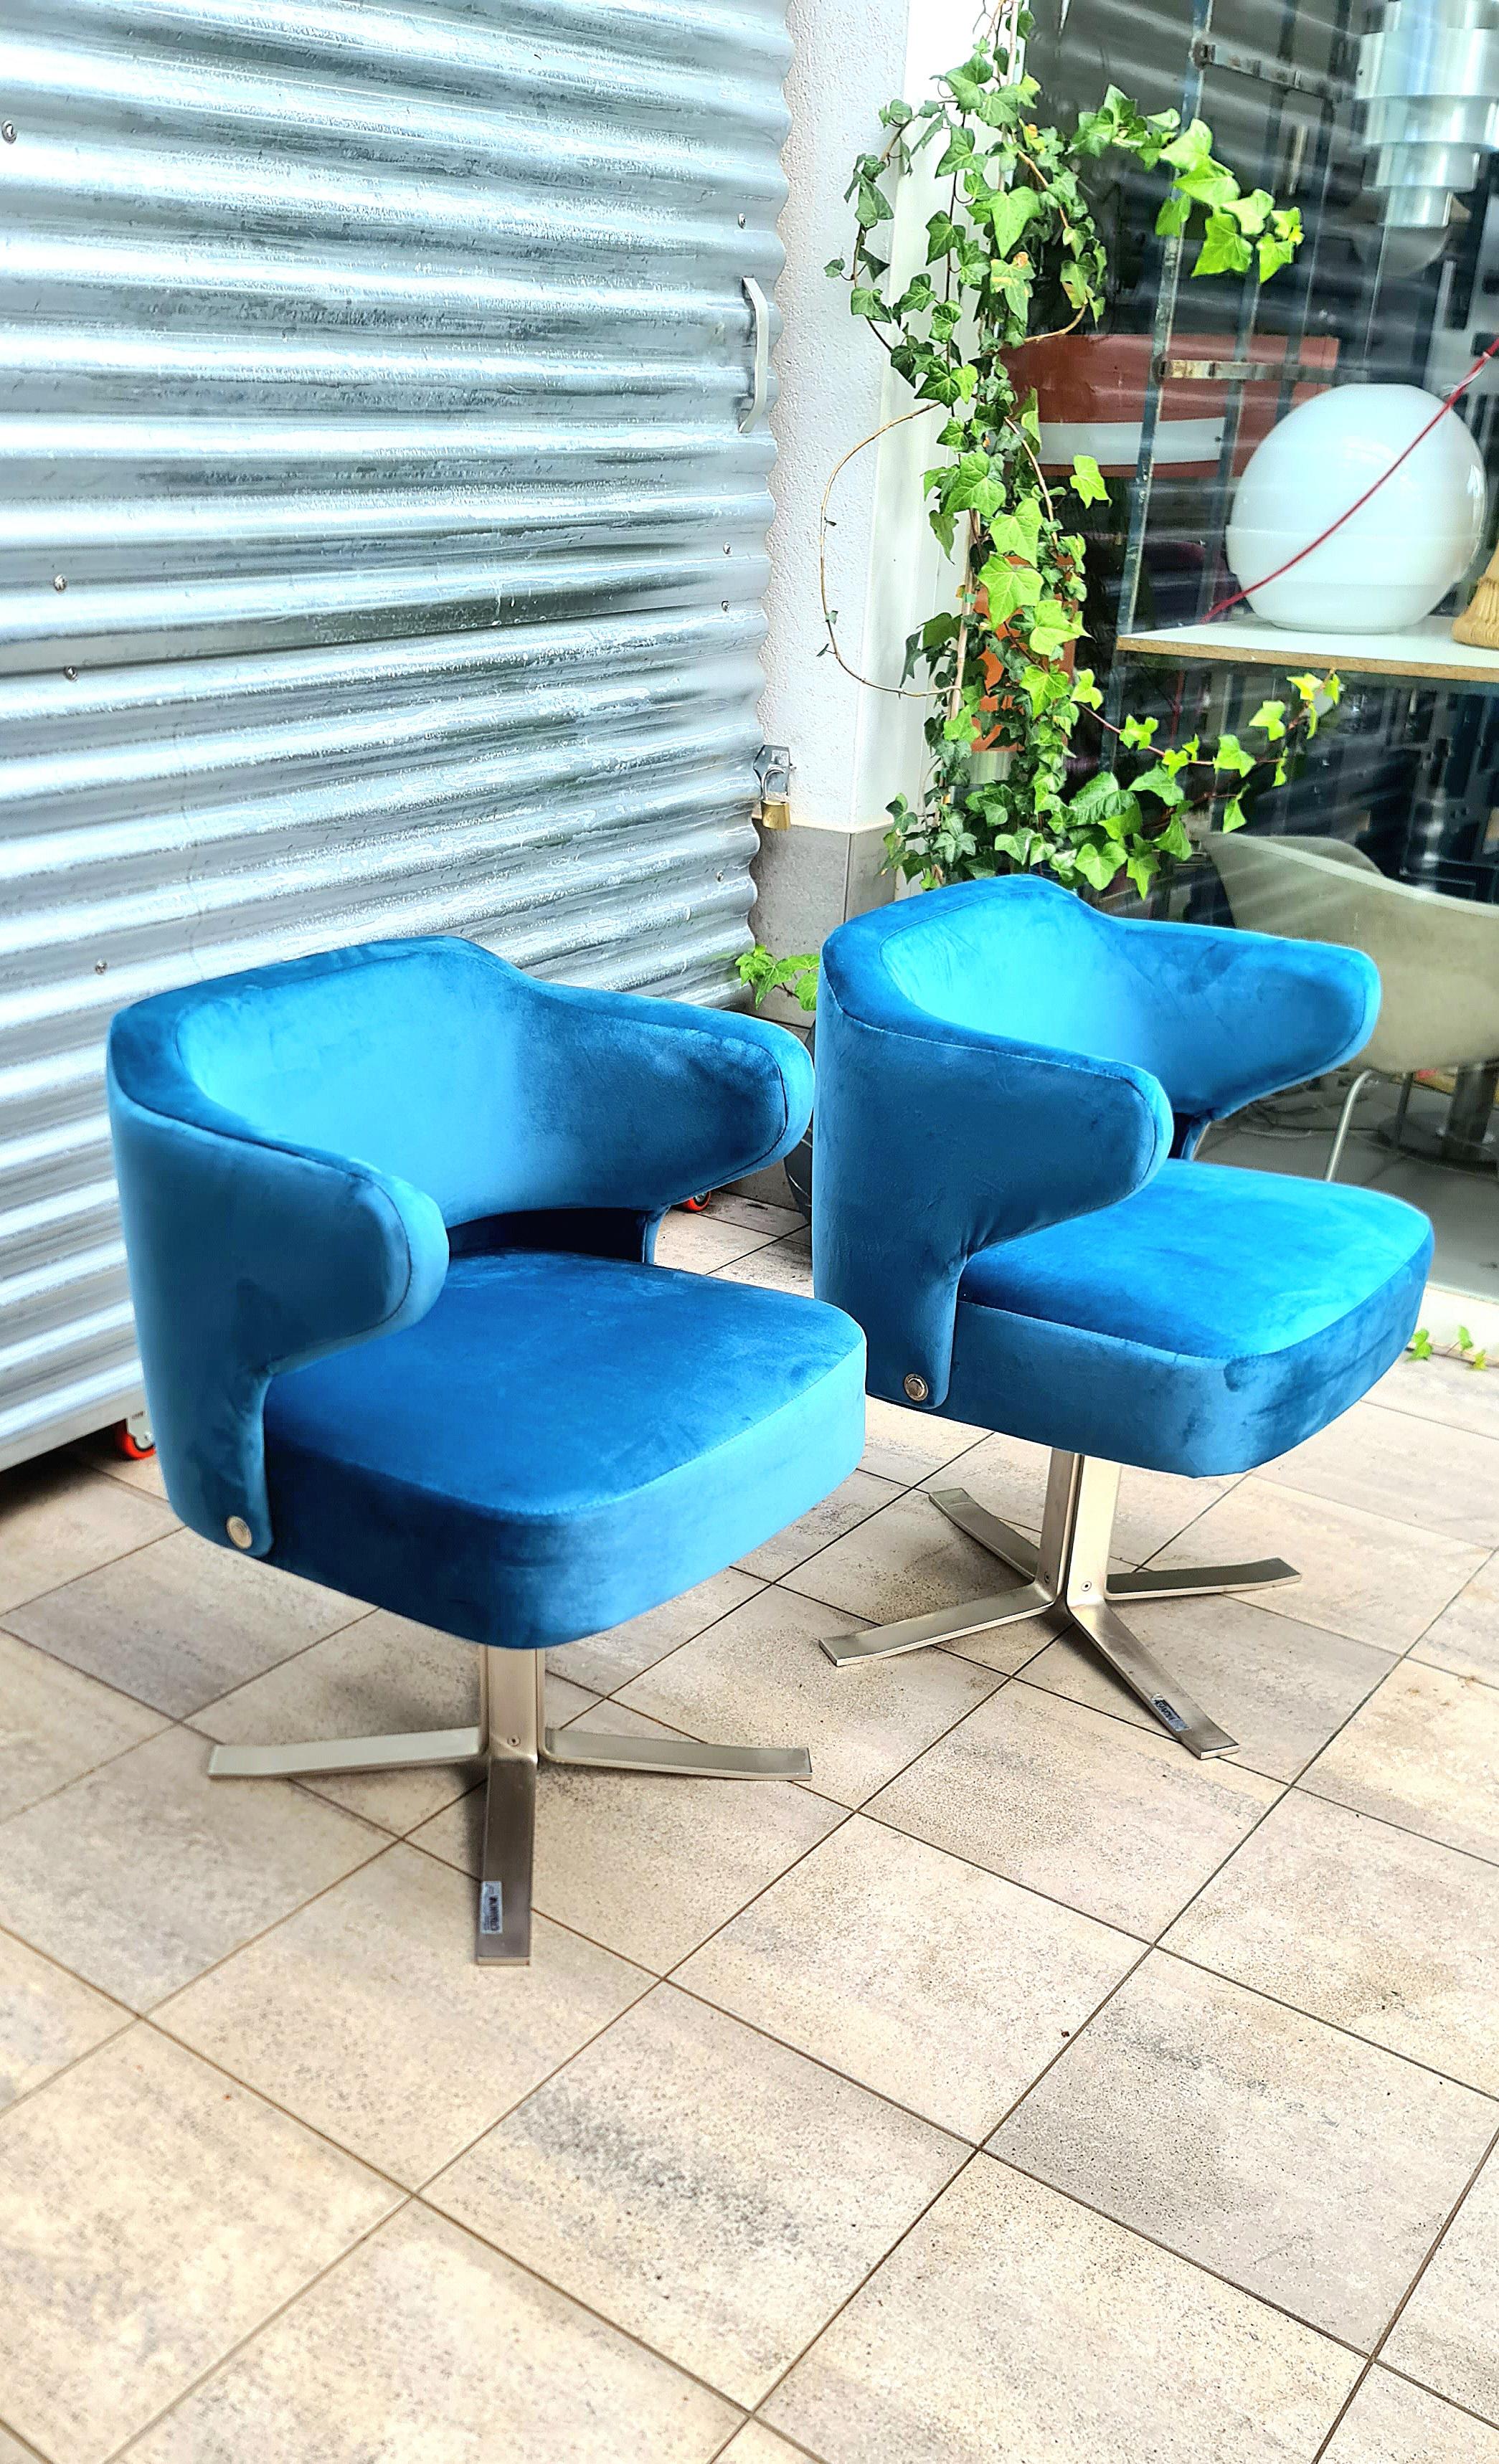 Set of Two Gianni Moscatelli Swivel 'Poney' Chairs for Formanova, Italy 1970's For Sale 7